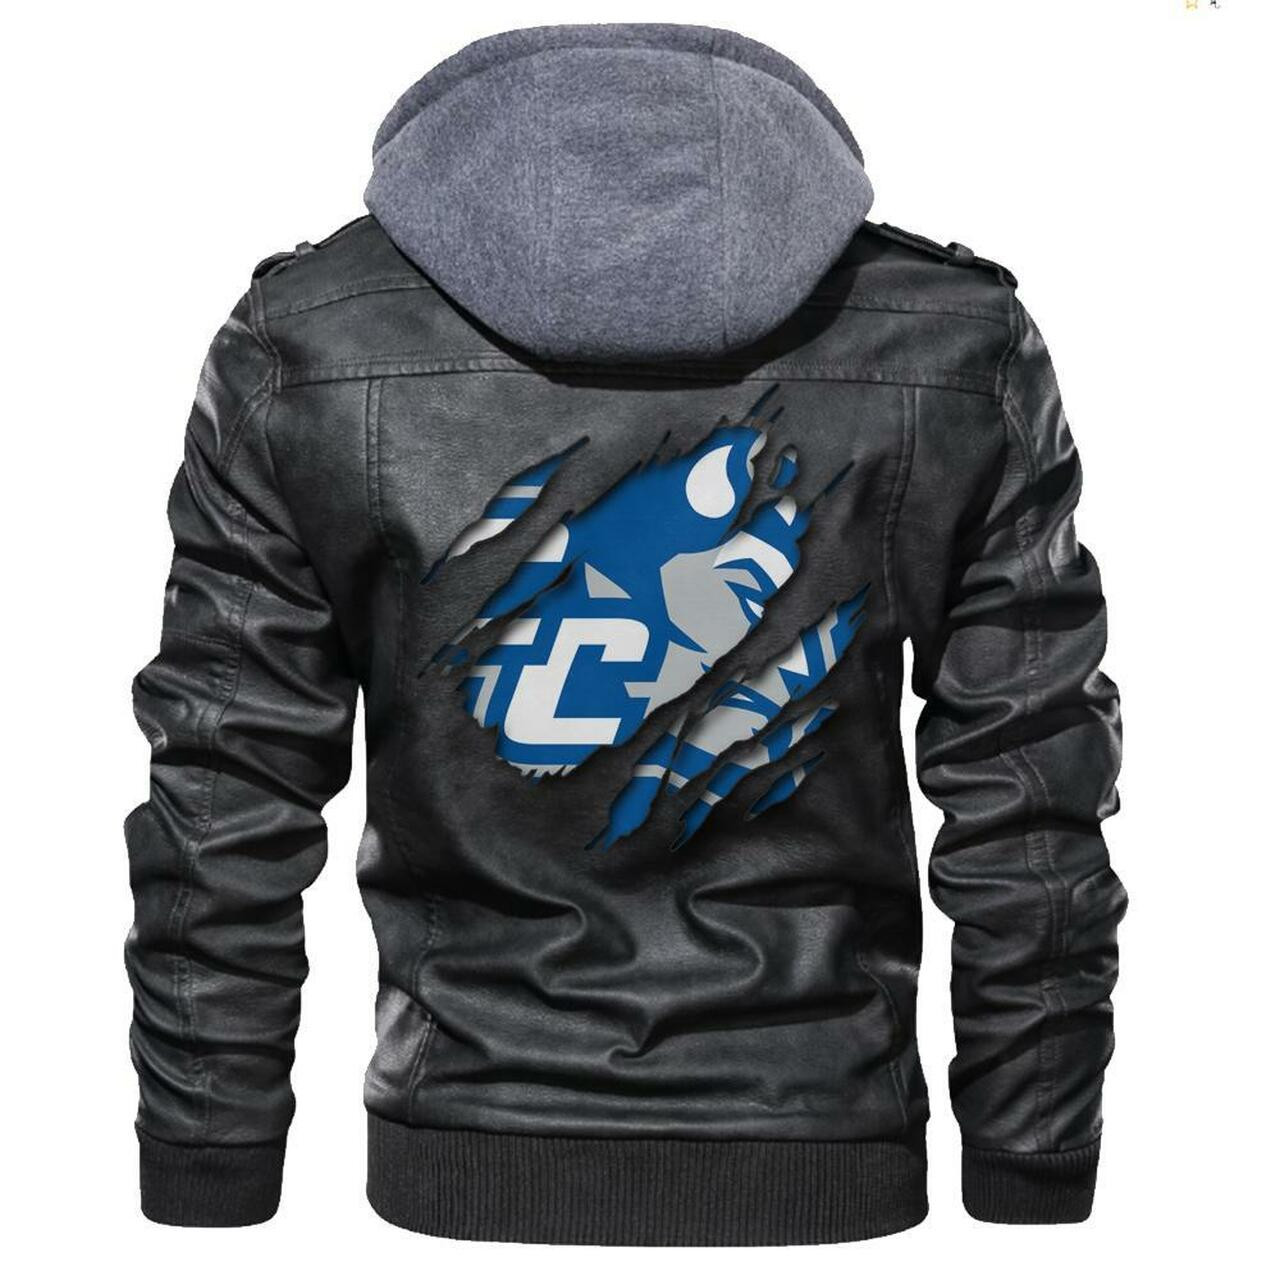 Our store has all of the latest leather jacket 88